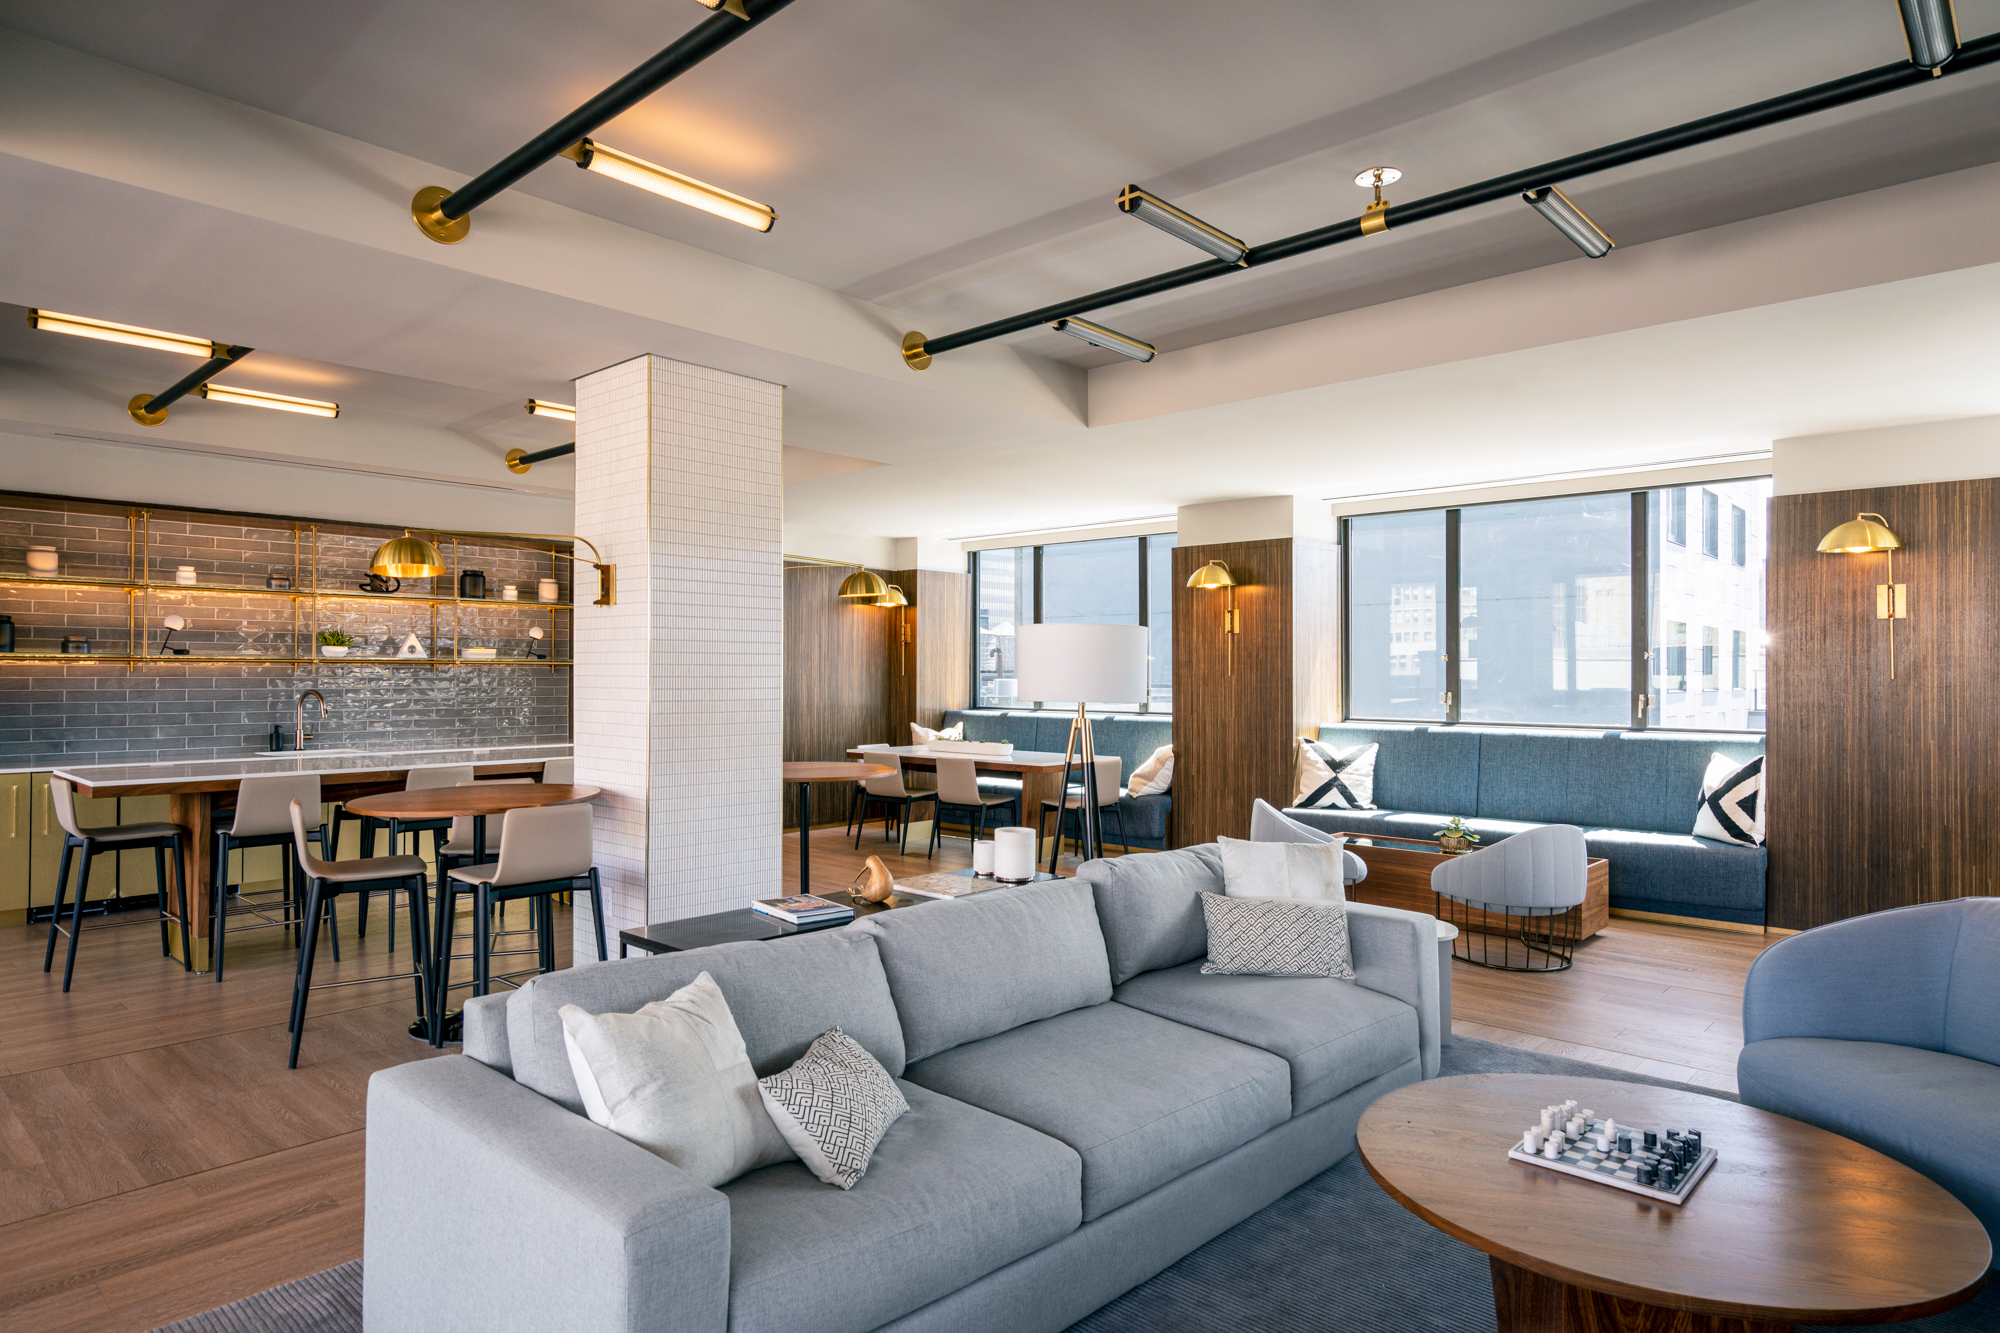 Tenants Can Escape the Hustle and Bustle of Day-to-Day Life in Hollingsworth's Lobby